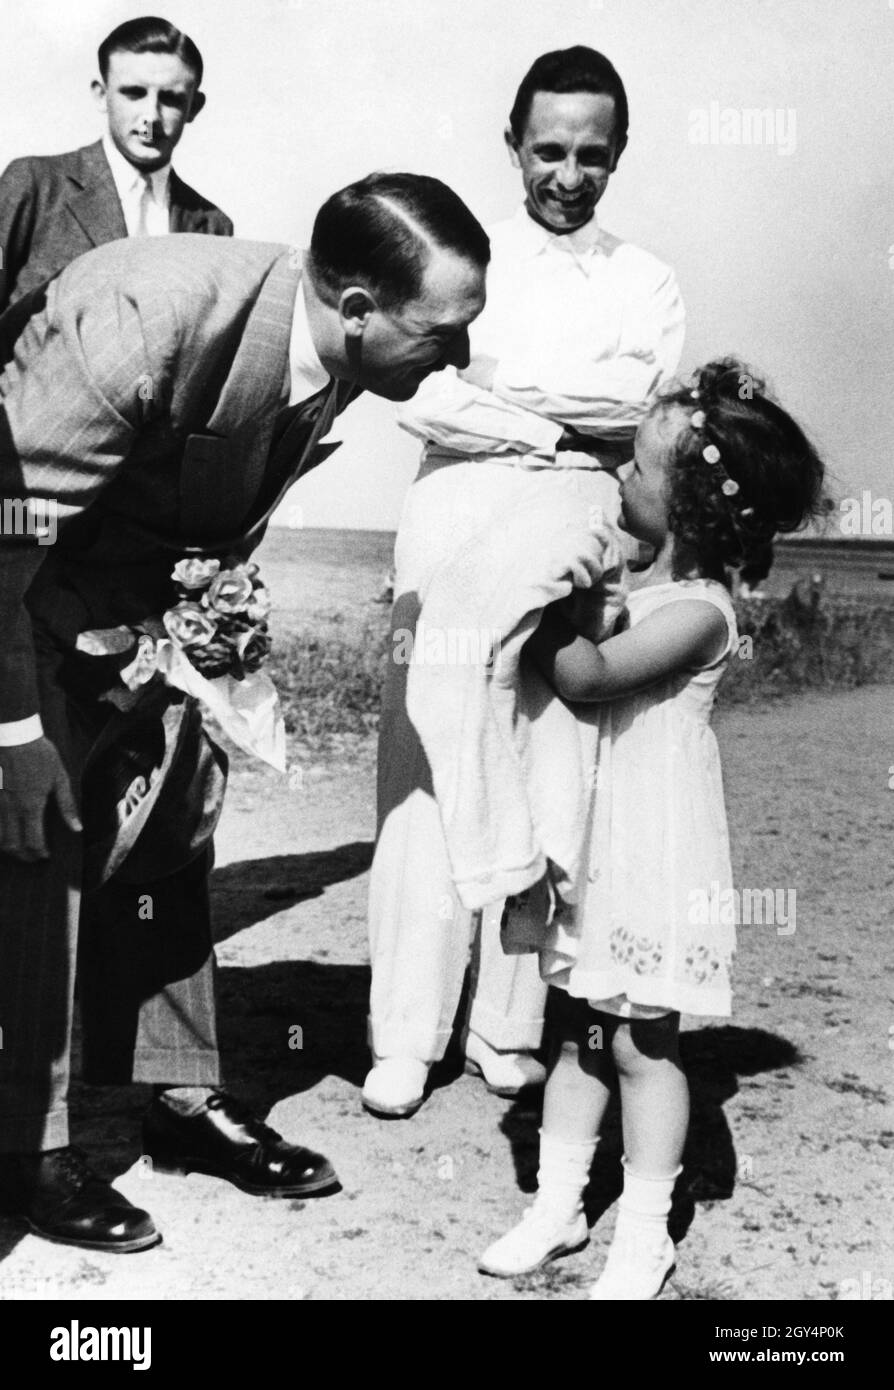 Adolf Hitler greets, in the presence of her father Joseph, Helga Goebbels, the eldest of six children of the Goebbels couple. Peter Longerich, the Hitler and Goebbels biographer described the Gooebbels as Hitler's surrogate family. Hitler was called Uncle Adolf by the children and Magda Goebbels chose to poison the children after the end of the Third Reich was certain and Hitler also took his own life. [automated translation] Stock Photo